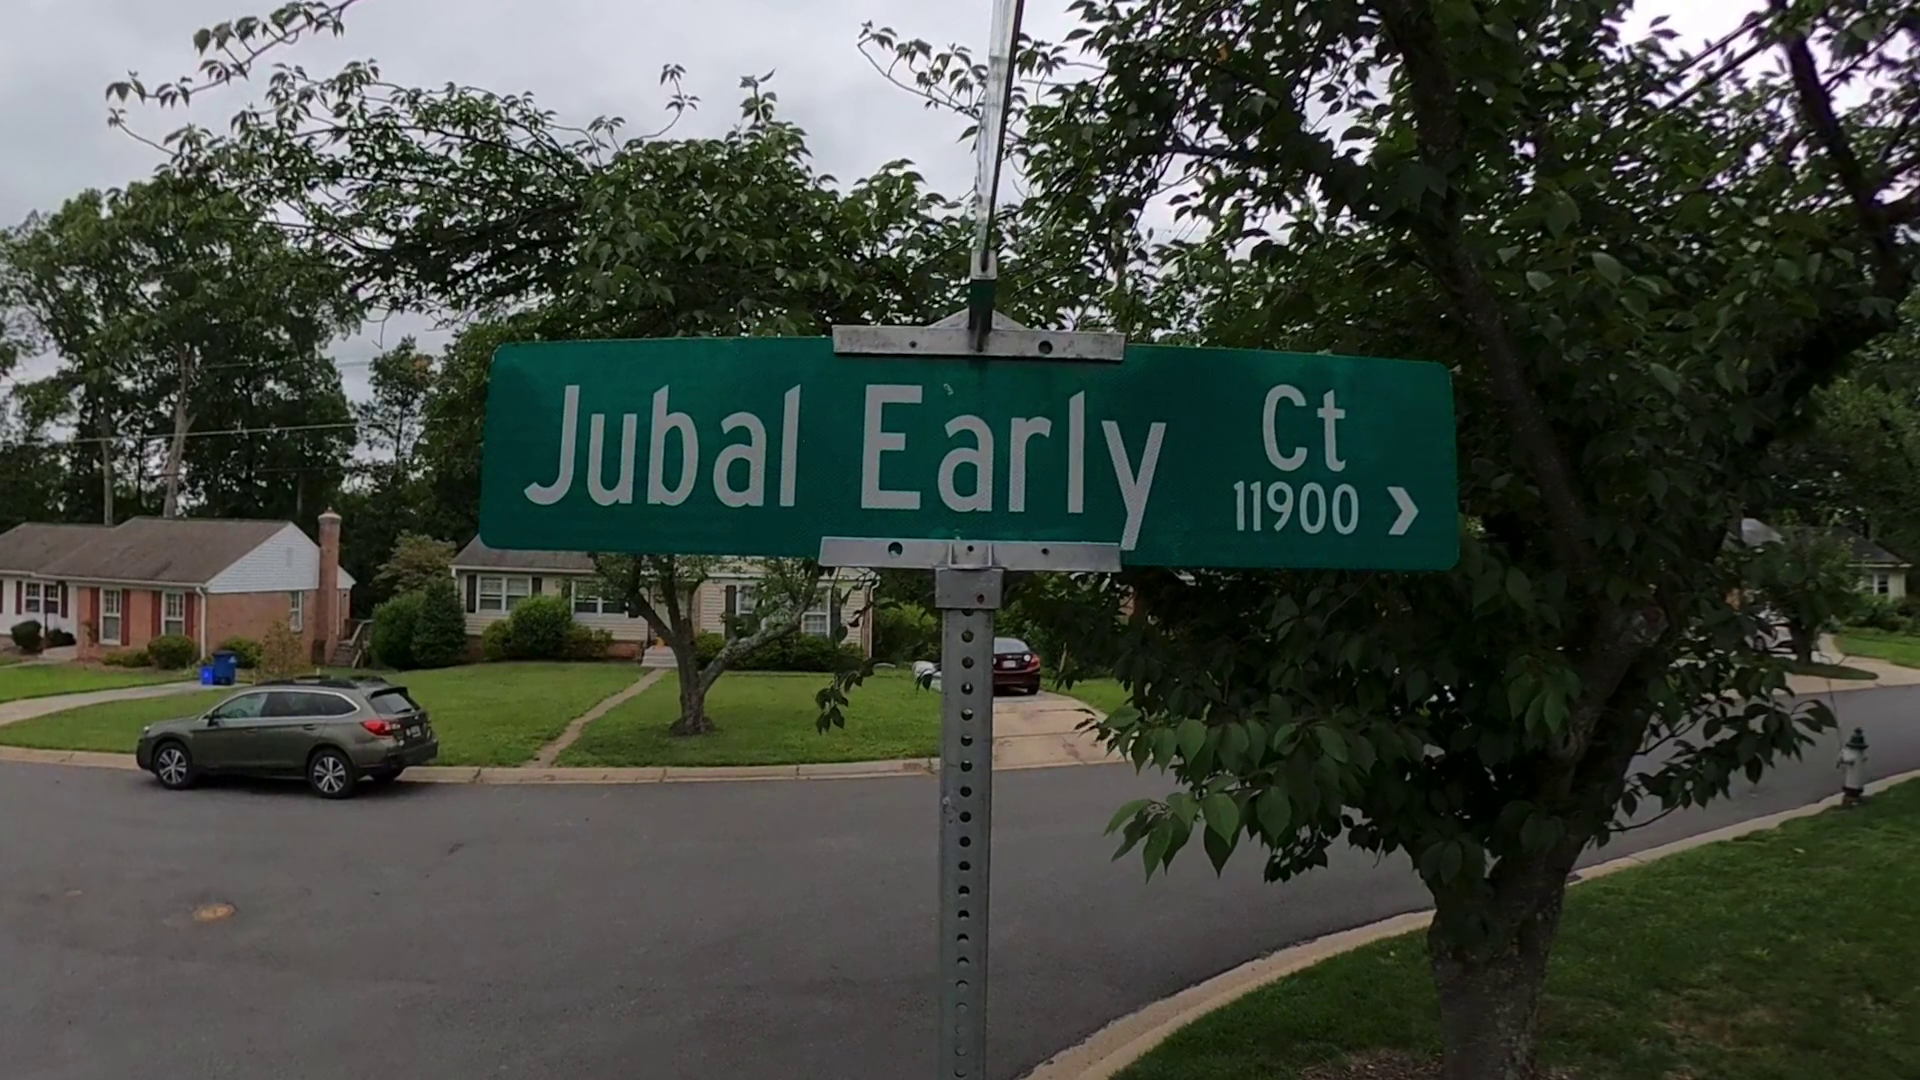 Jubal Early Court was named in the 1950's after a Confederate general whose memoirs included multiple passages calling Blacks "inferior."